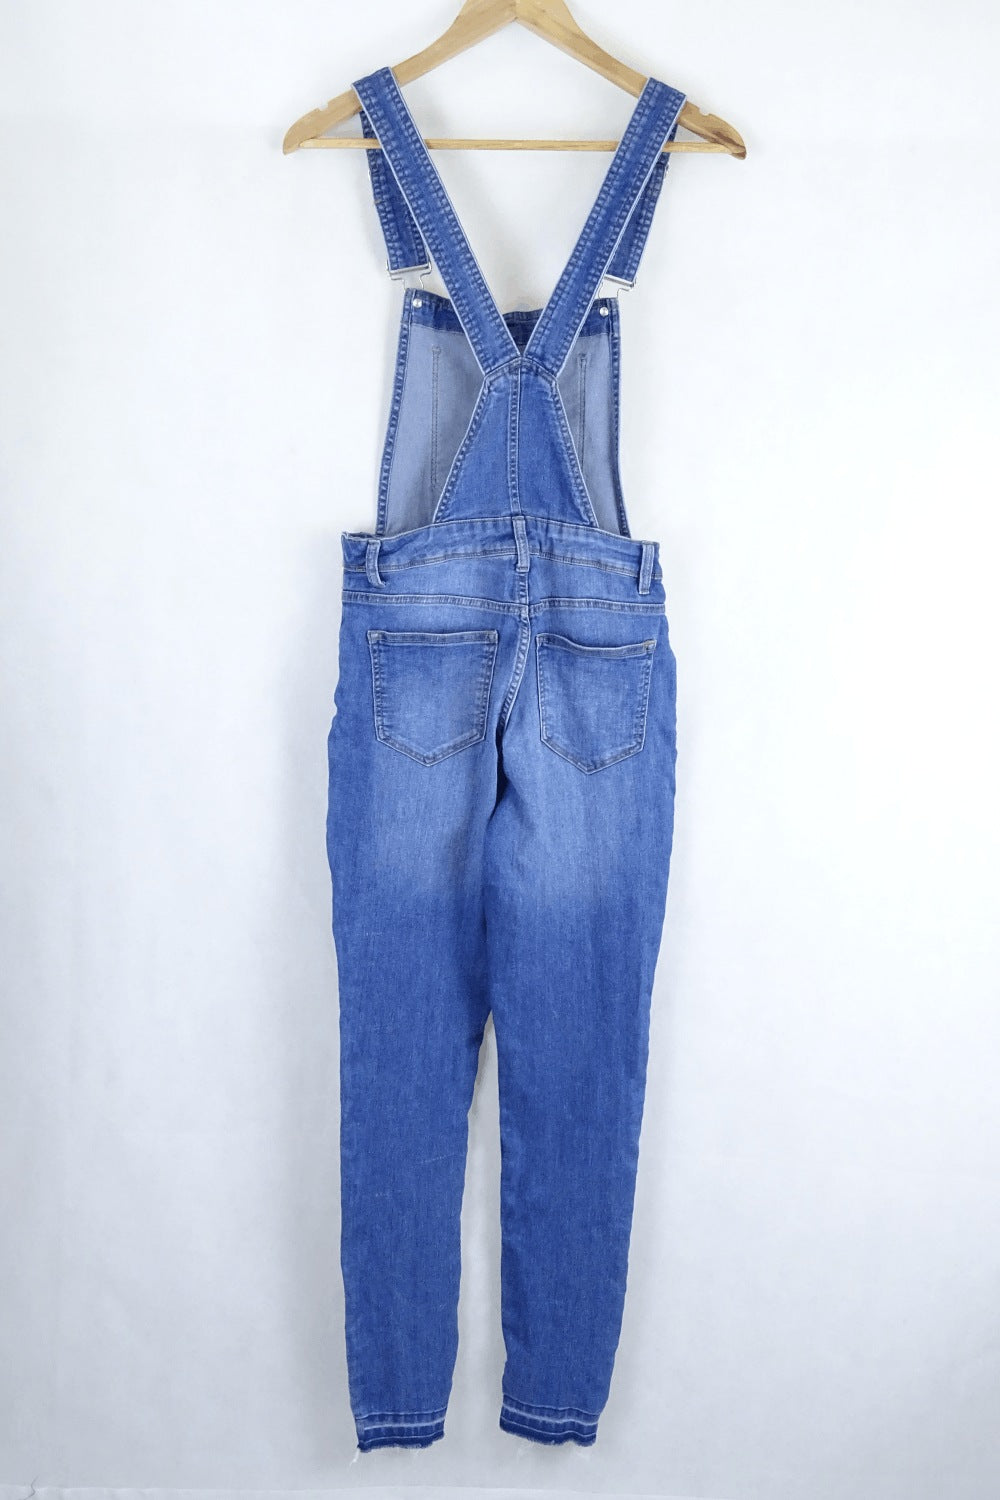 Divided Denim Overalls with Jeans Attached 8